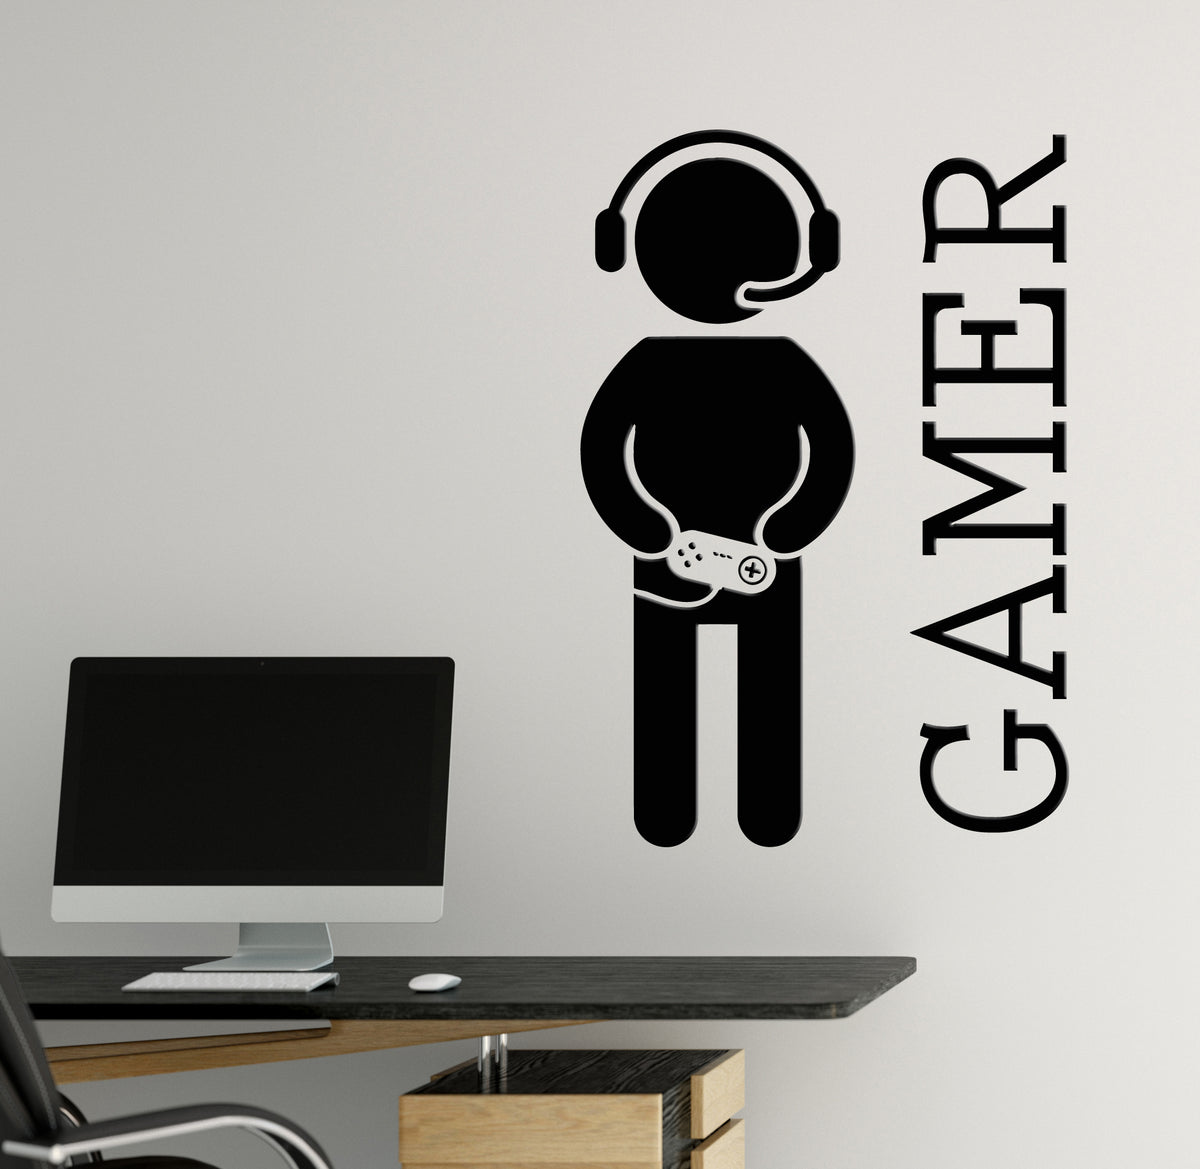 Vinyl Wall Decal Video Games Joystick Gamer Zoon Room Stickers Mural (g6624)